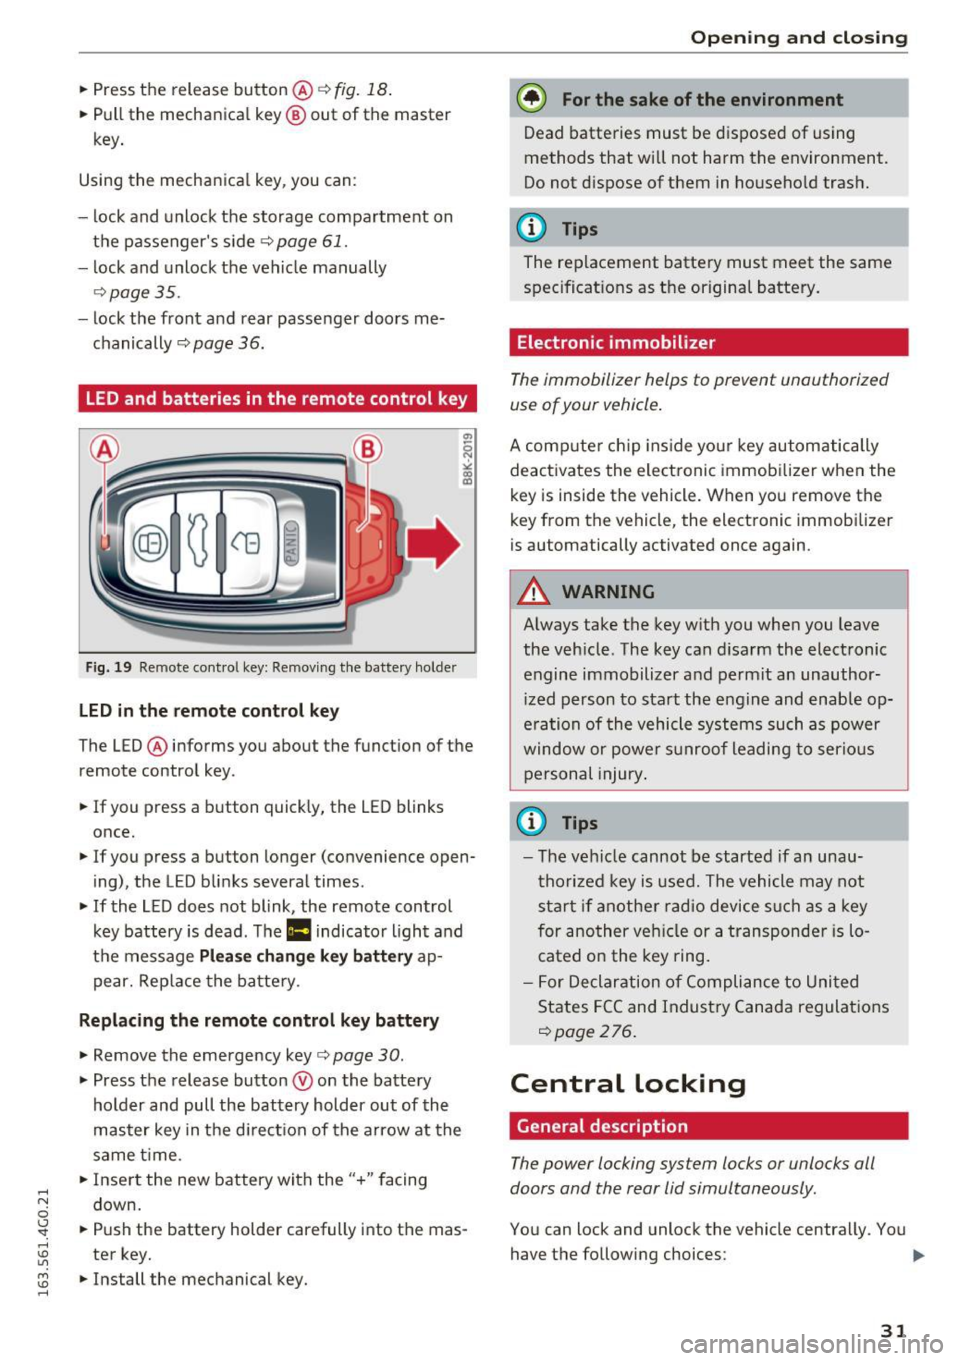 AUDI S6 2016 Owners Guide .... N 
0 CJ <I: .... I.Cl U"I 
M I.Cl ...... 
.. Press  the  release button@ c::> fig.  18. 
.. Pull  the  mechanical  key @ out  of  the  master 
key. 
Using  the mechanical  key , you  can: 
- loc